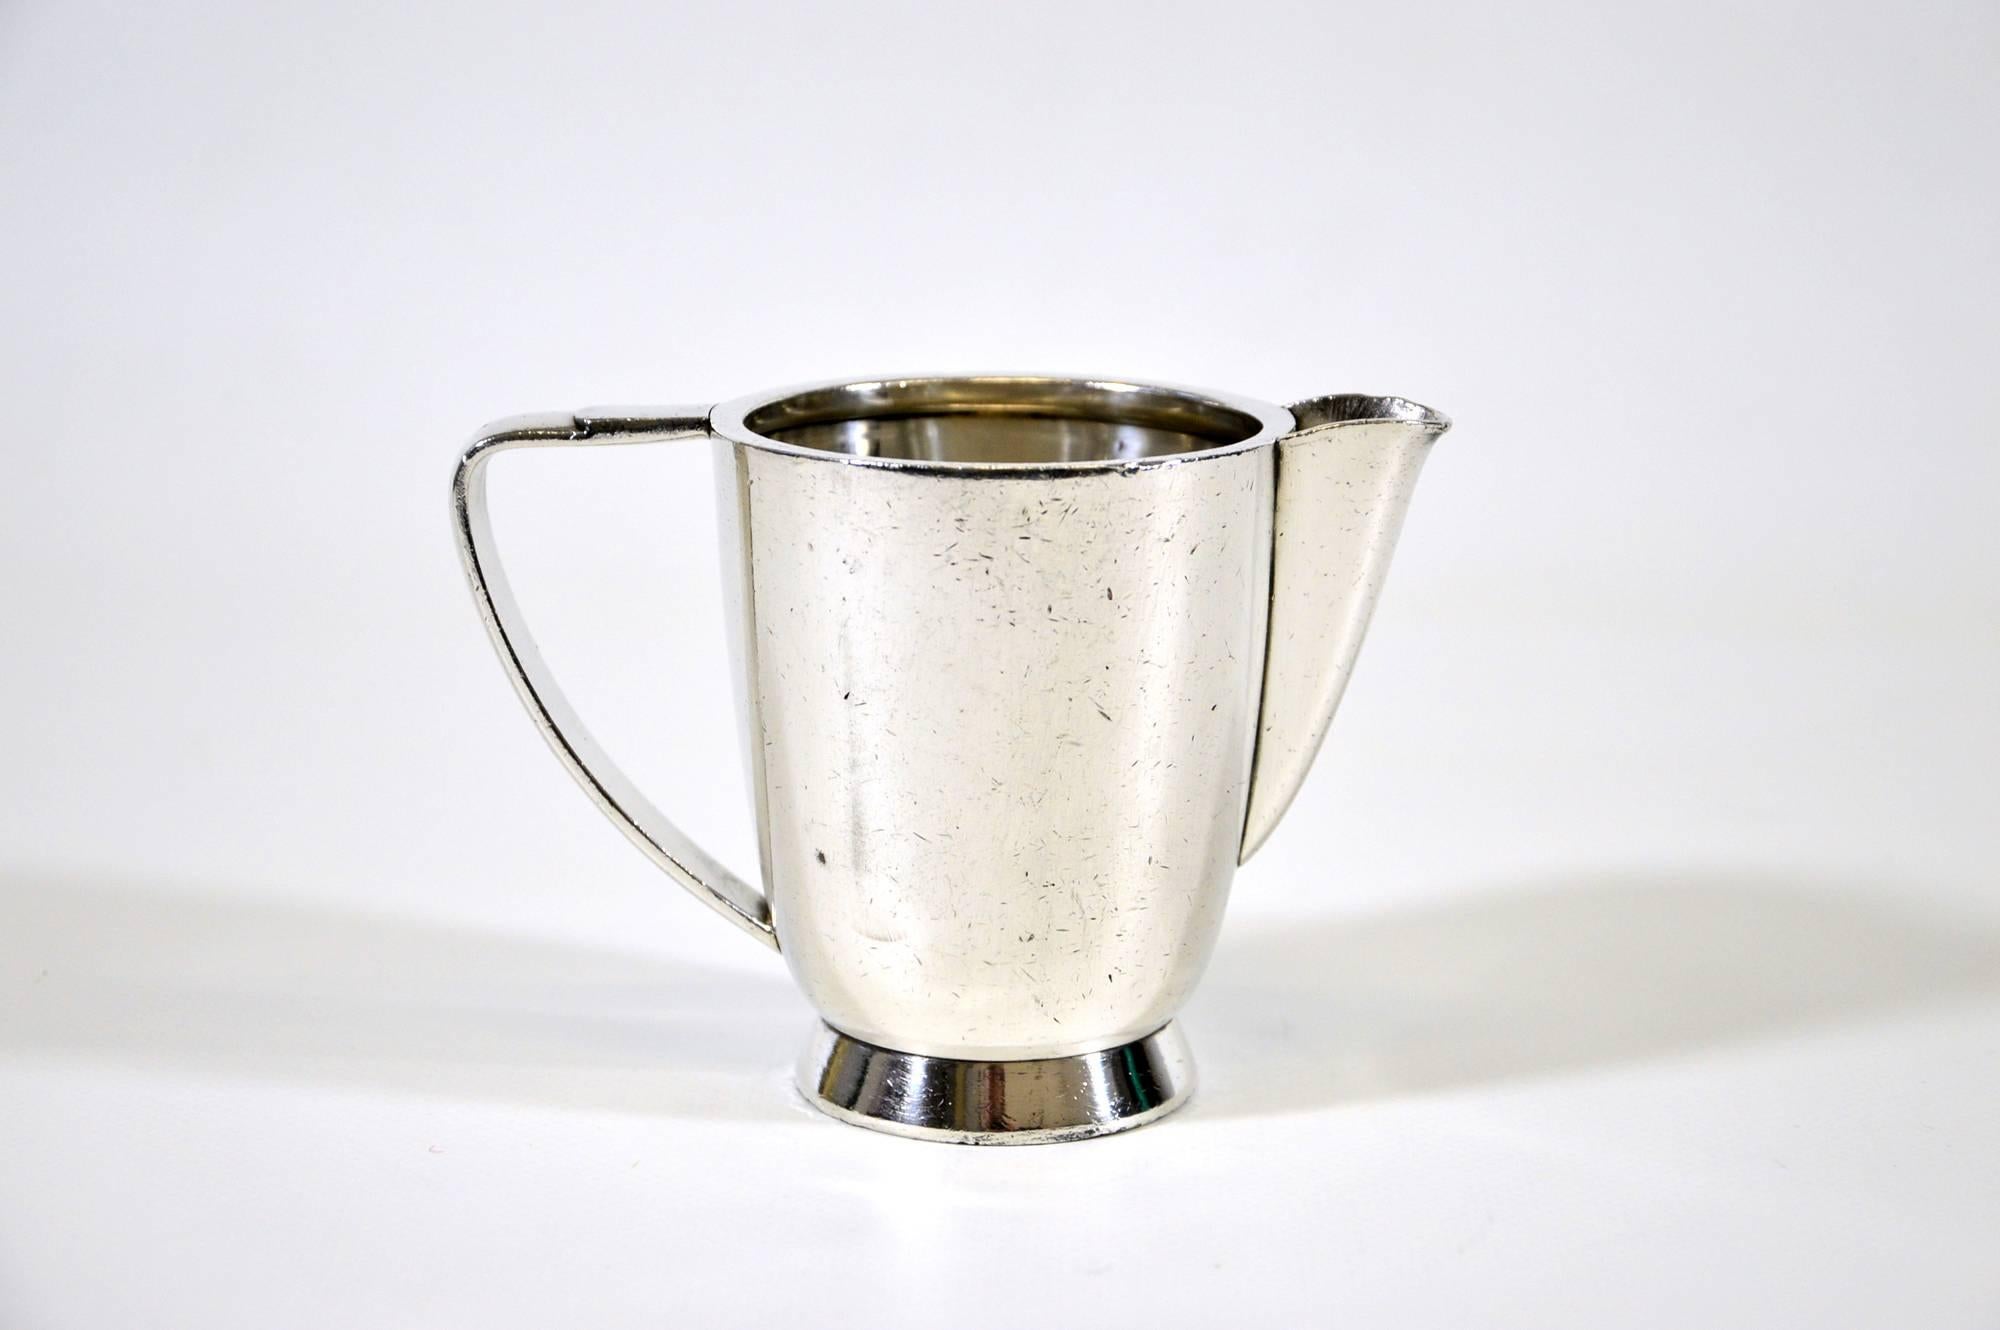 Silver plated alpacca milk jug, designed by Gio Ponti for Fratelli Calderoni, circa 1950. Coming from Palace Hotel in Rimini.
In good used condition, with some traces of use.